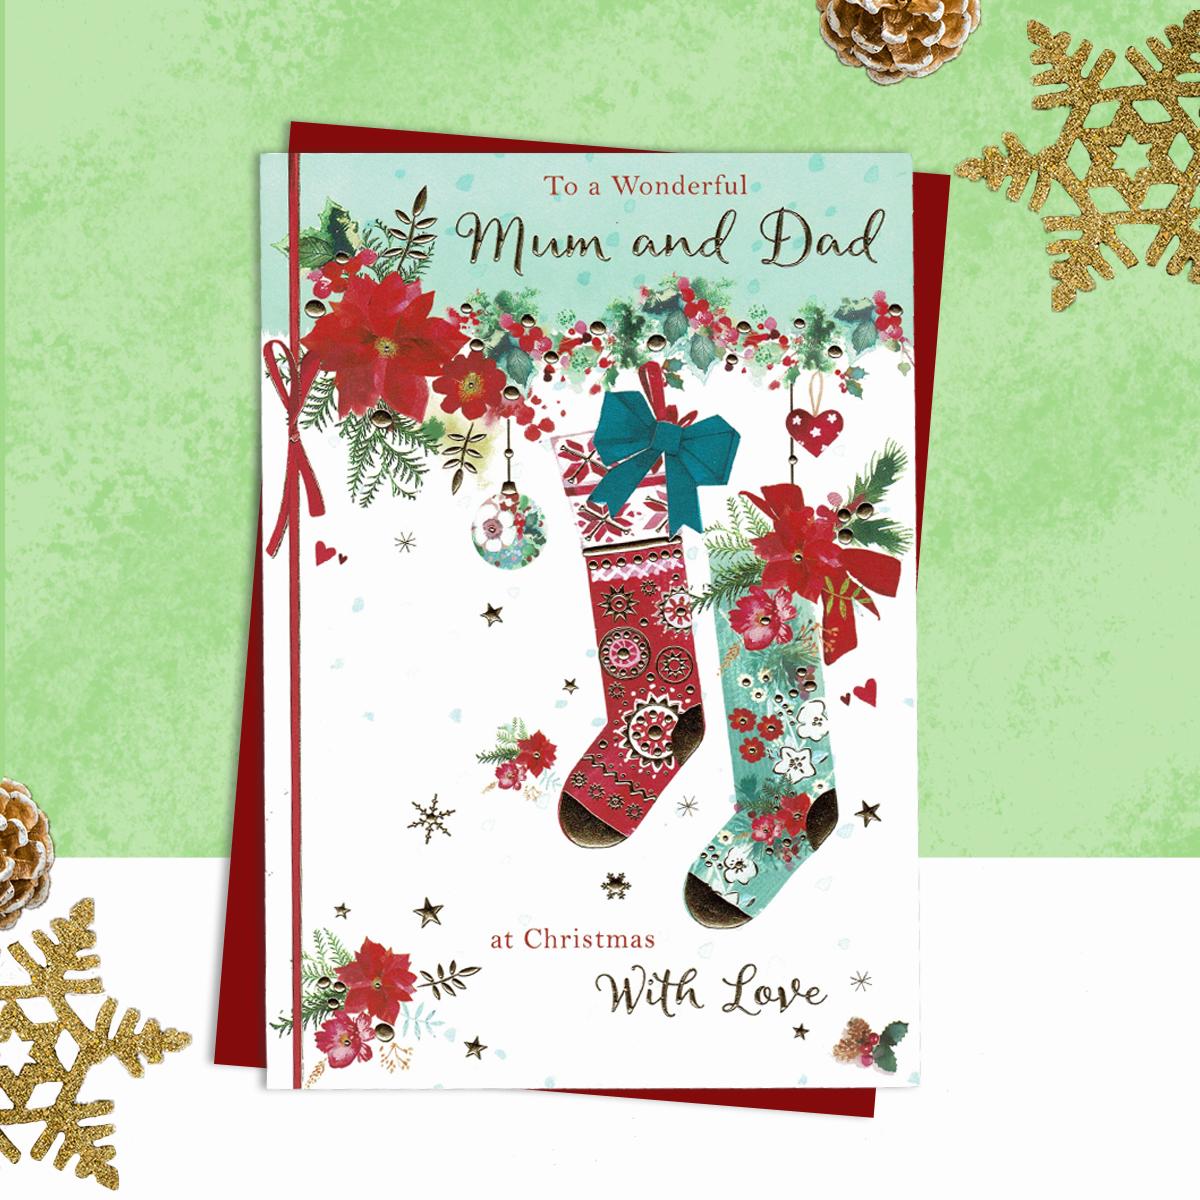 Mum And Dad Christmas Stockings Greeting Card Alongside Its Red Envelope